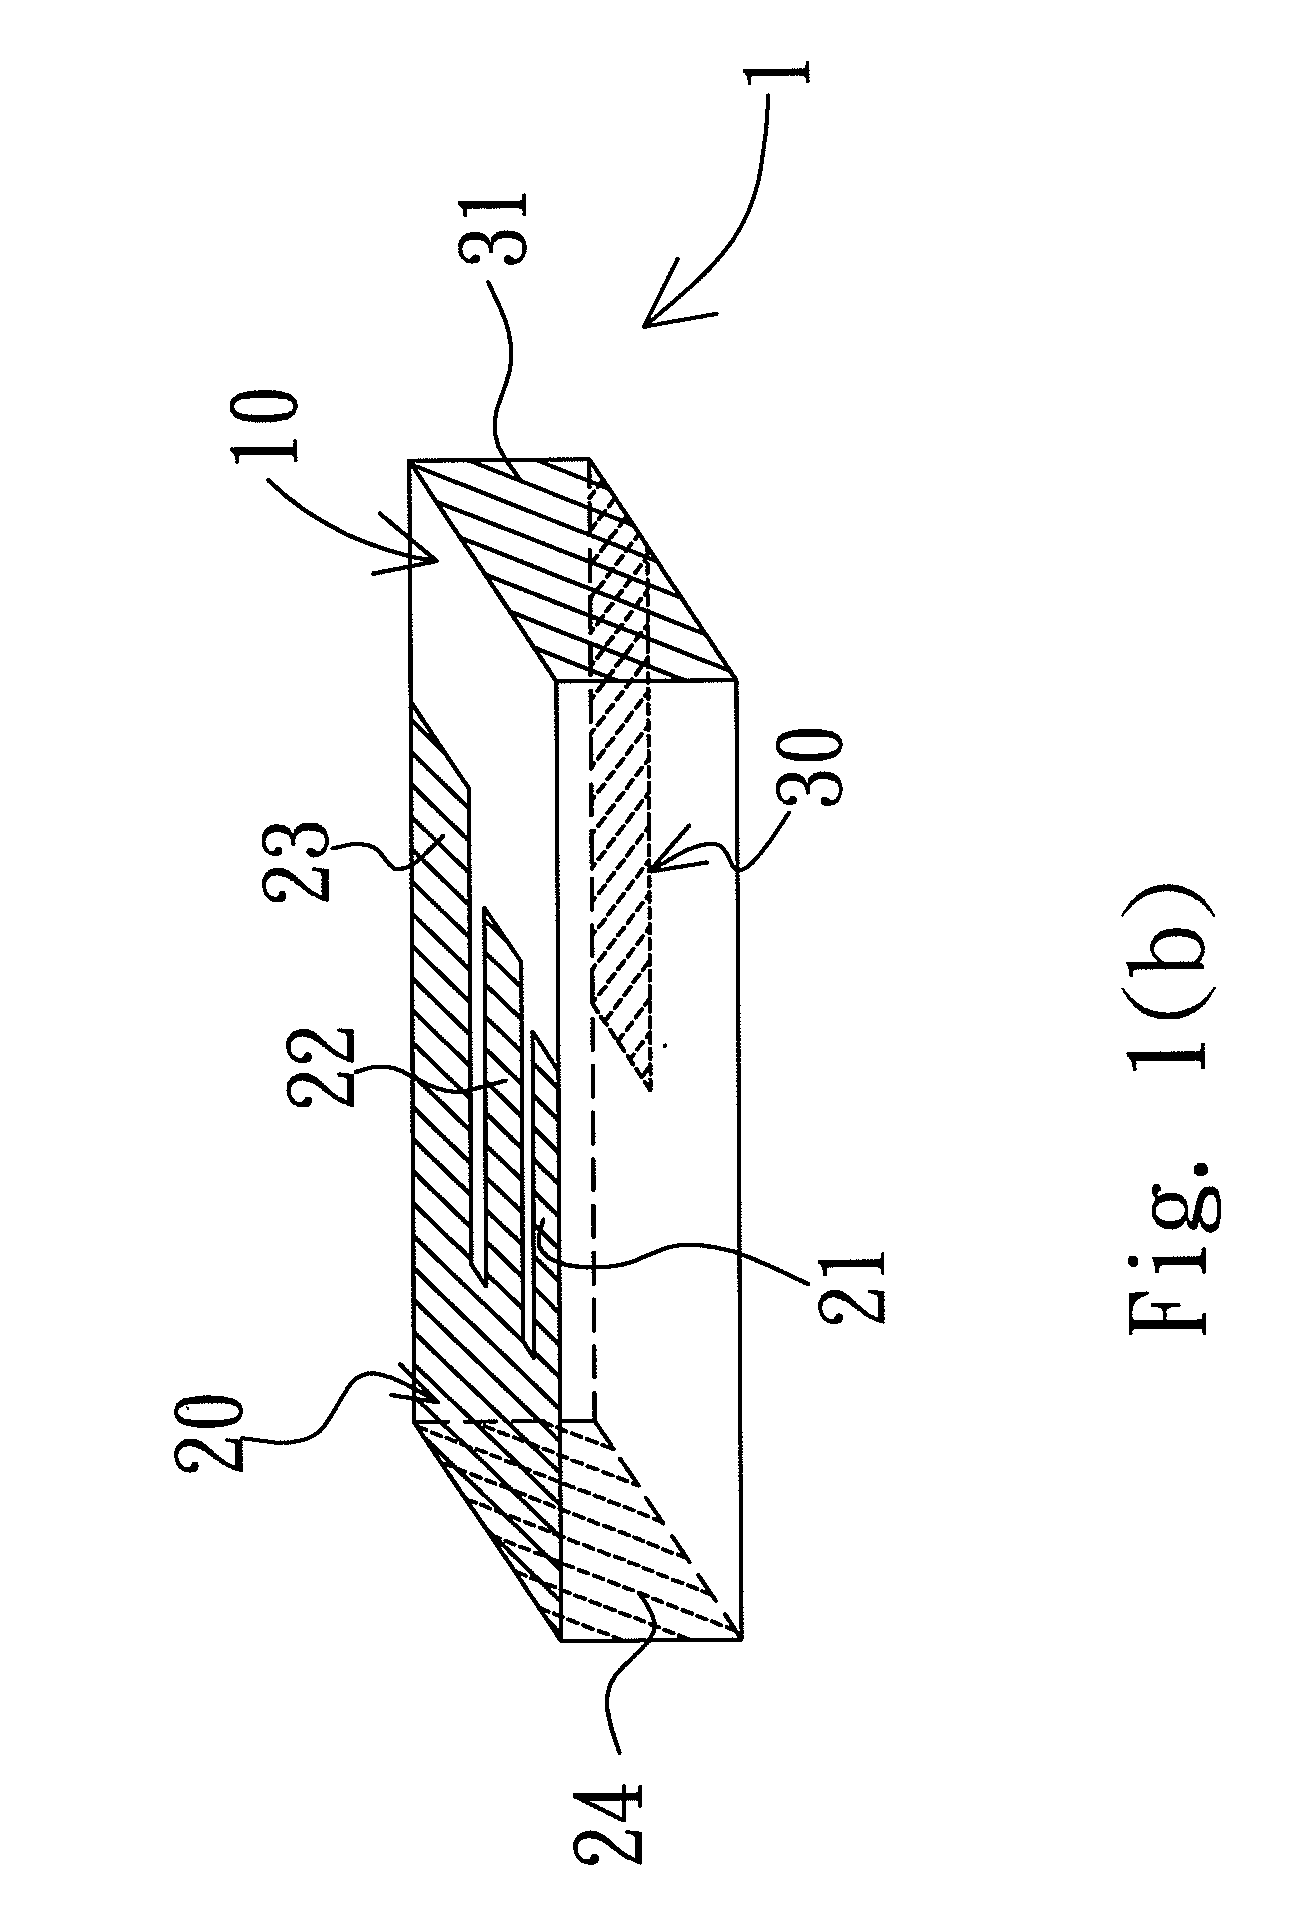 Miniature multi-frequency antenna